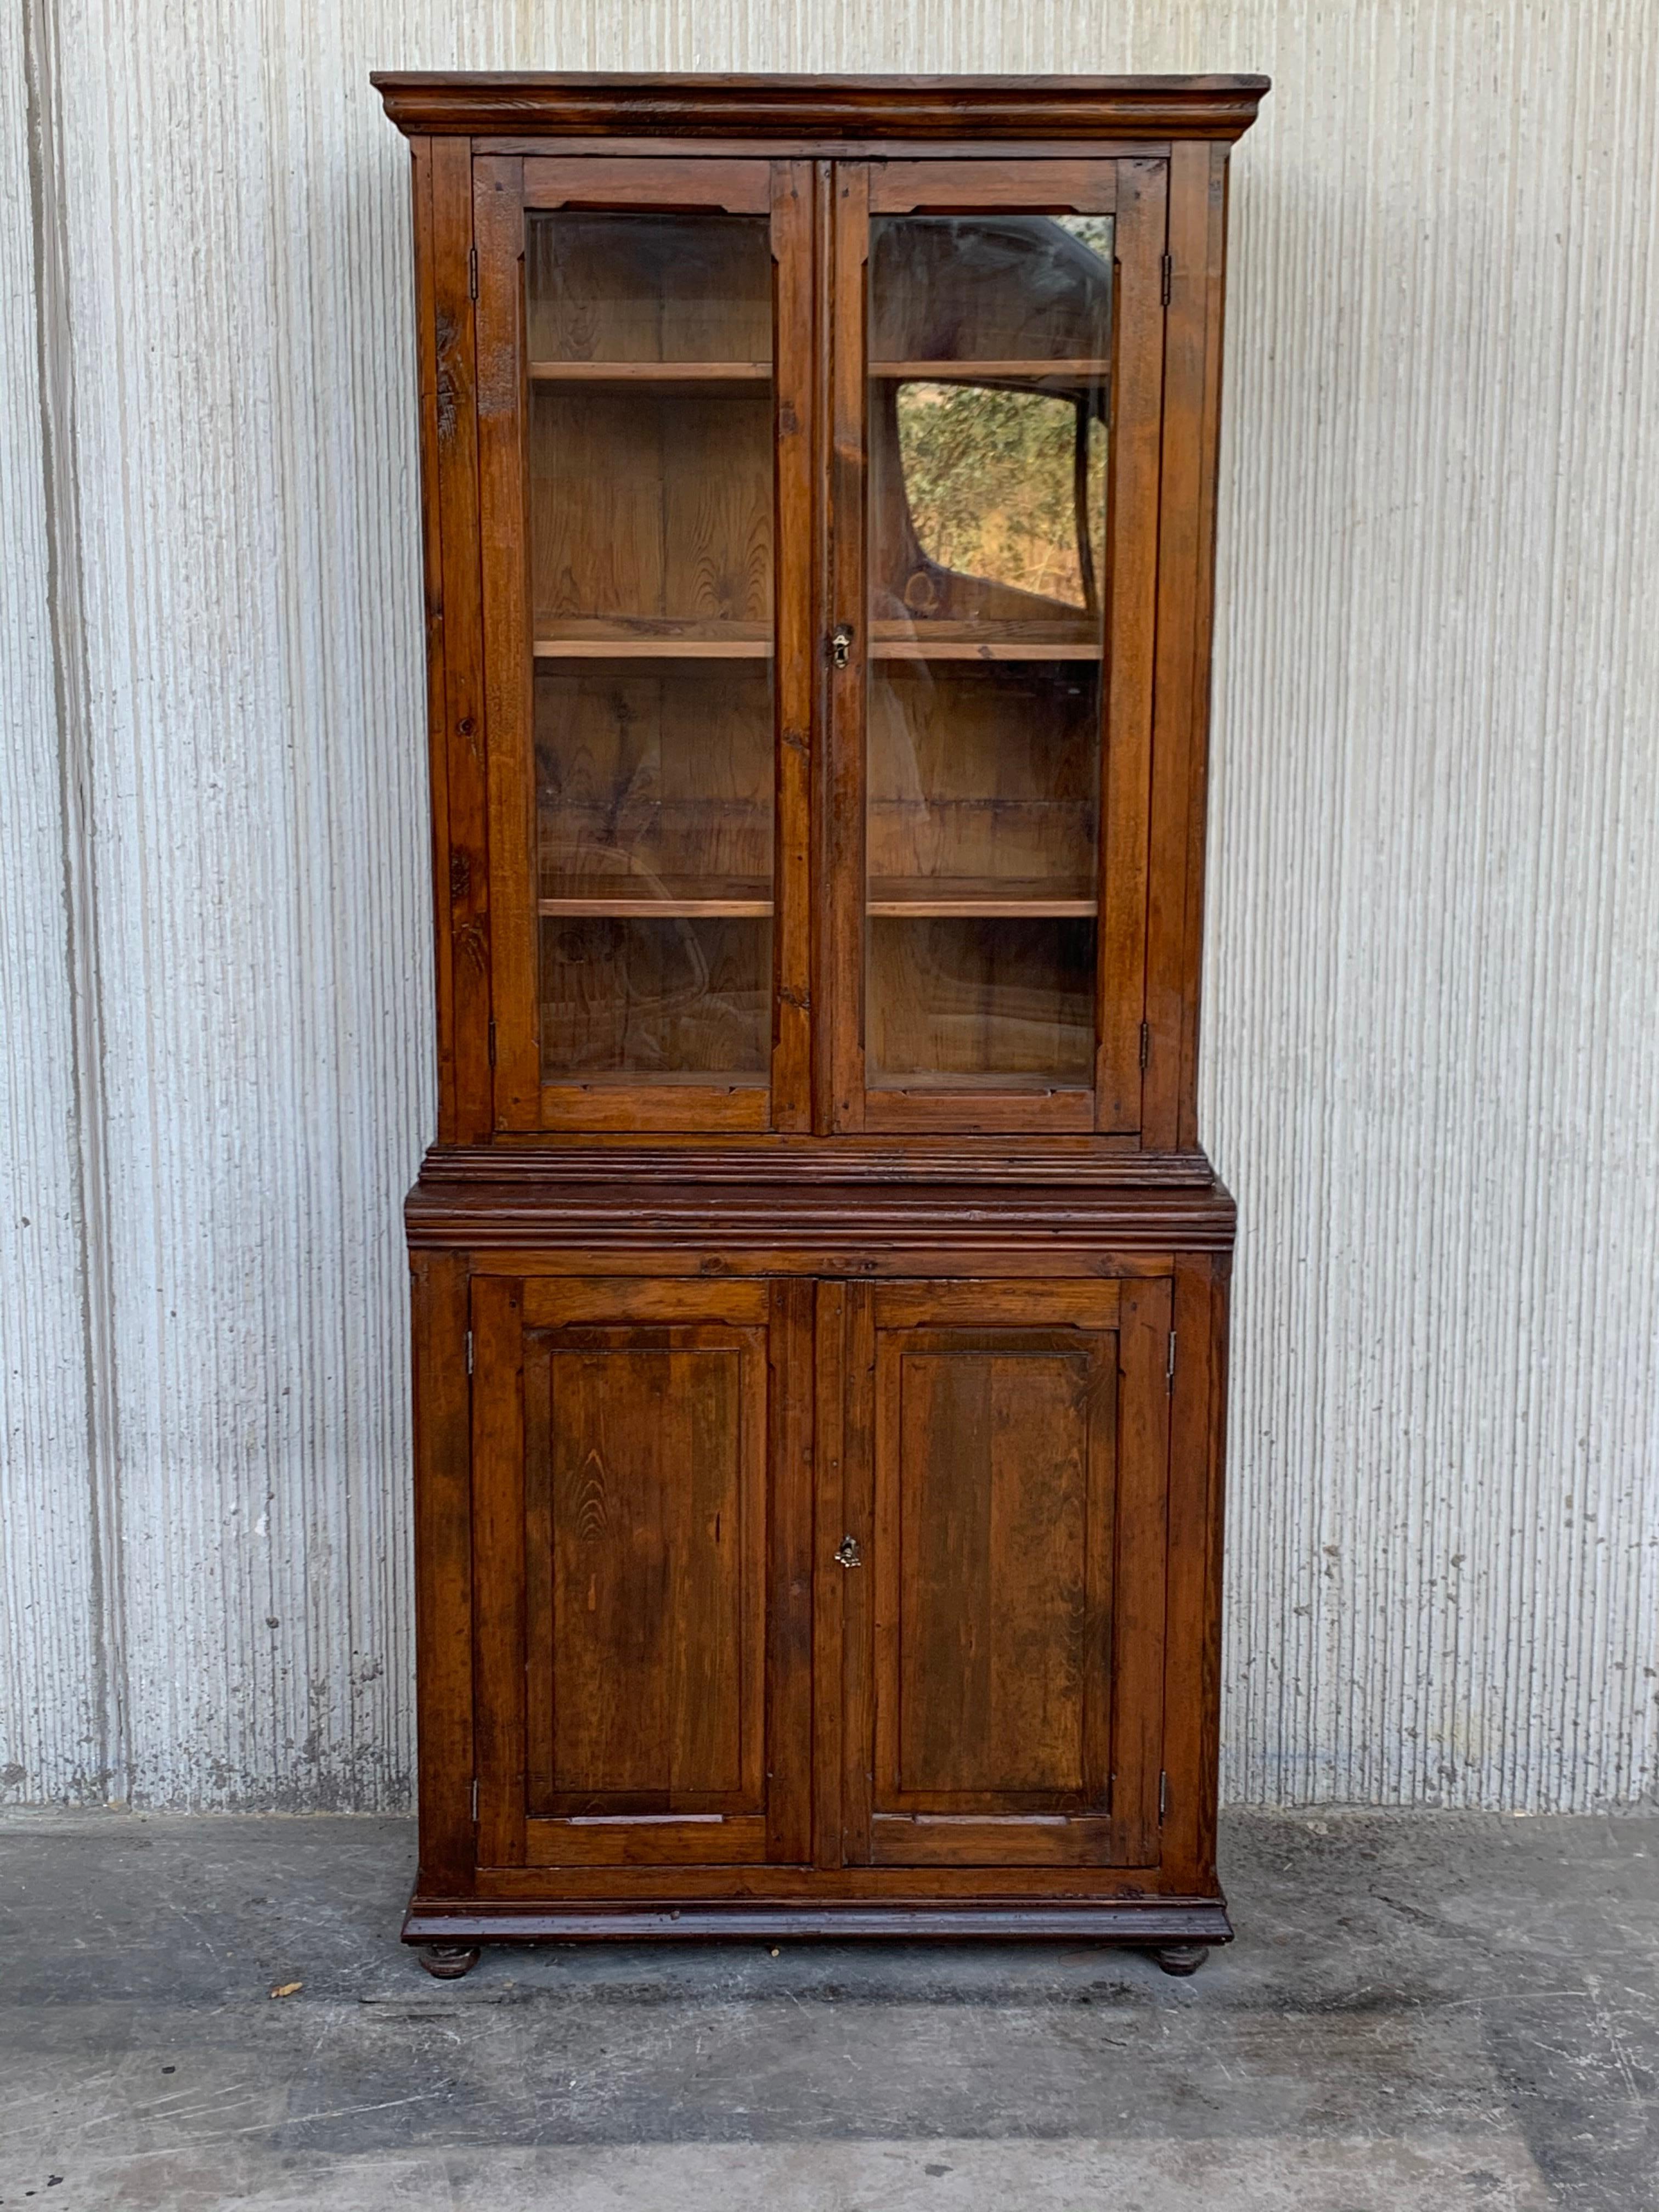 Absolutely gorgeous vitrine cabinet from Spain. In two parts. Originally used as a bookcase. Stunning patina, with its warm pale golden/brown. Paned glass cabinet doors above, and handsome profiled doors in the bottom part. Very suitable for many